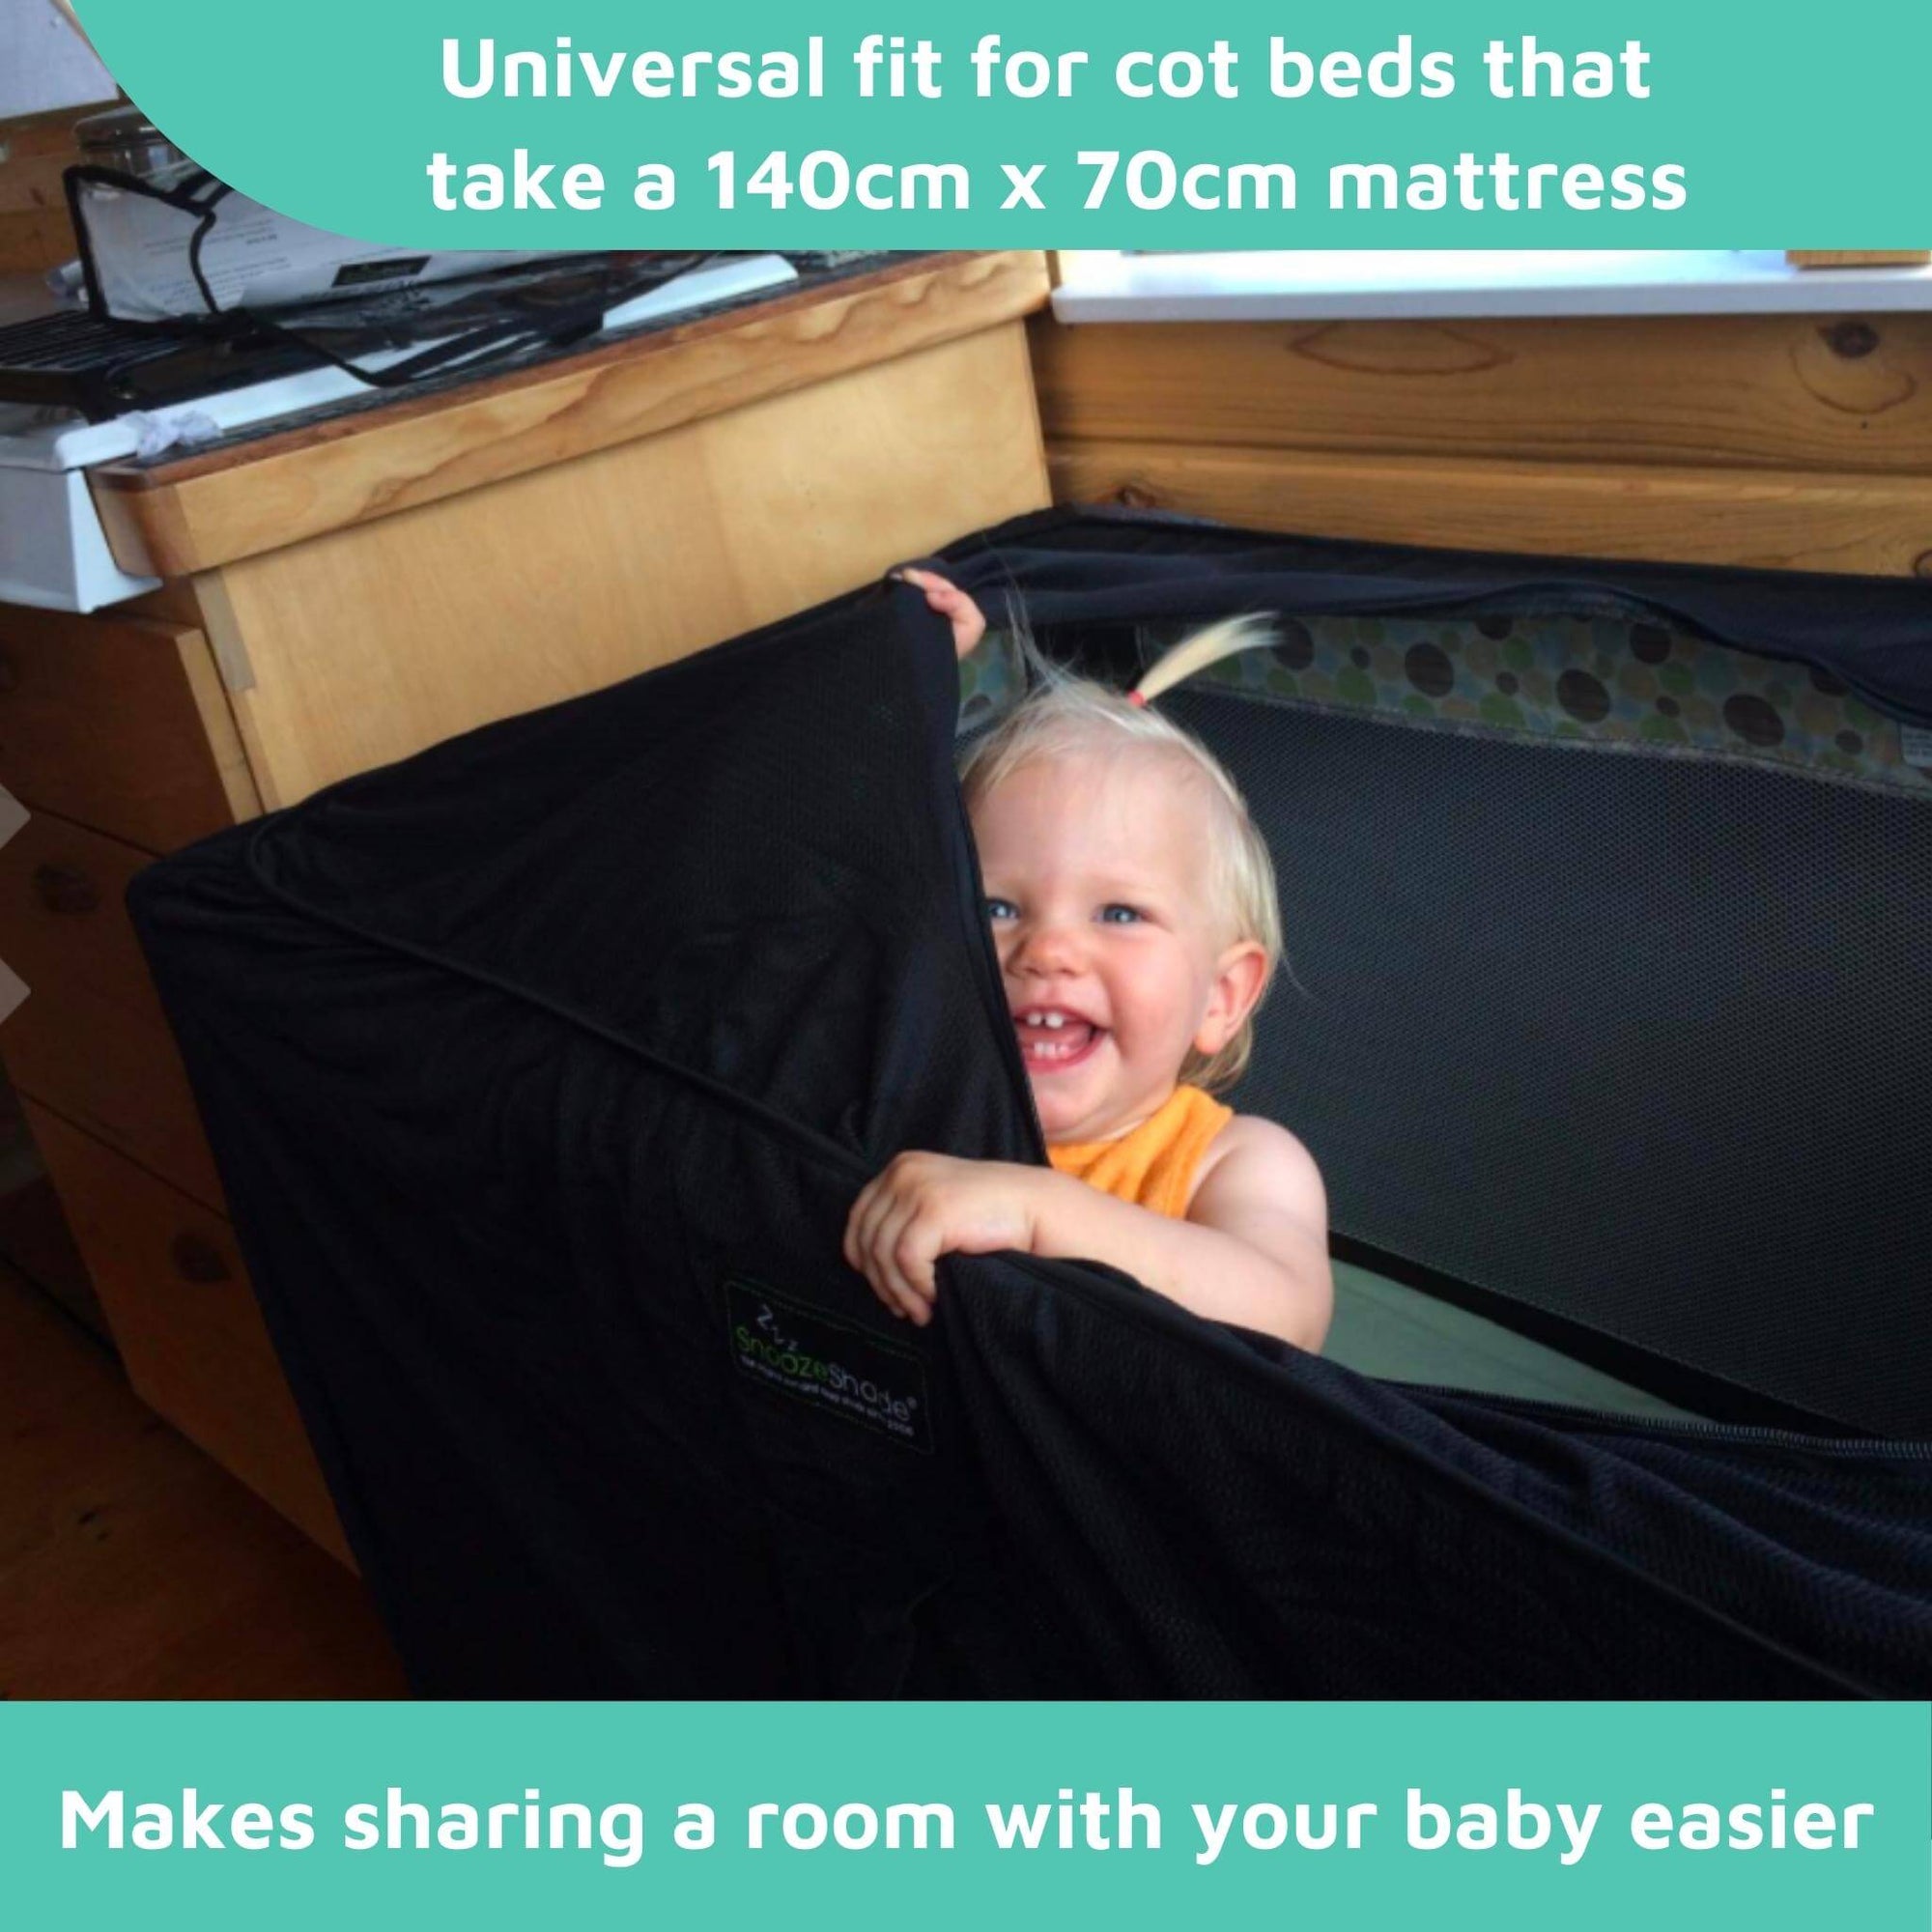 SnoozeShade for Cot Beds | Cot bed blackout canopy and sleep shade | Air-permeable fabric